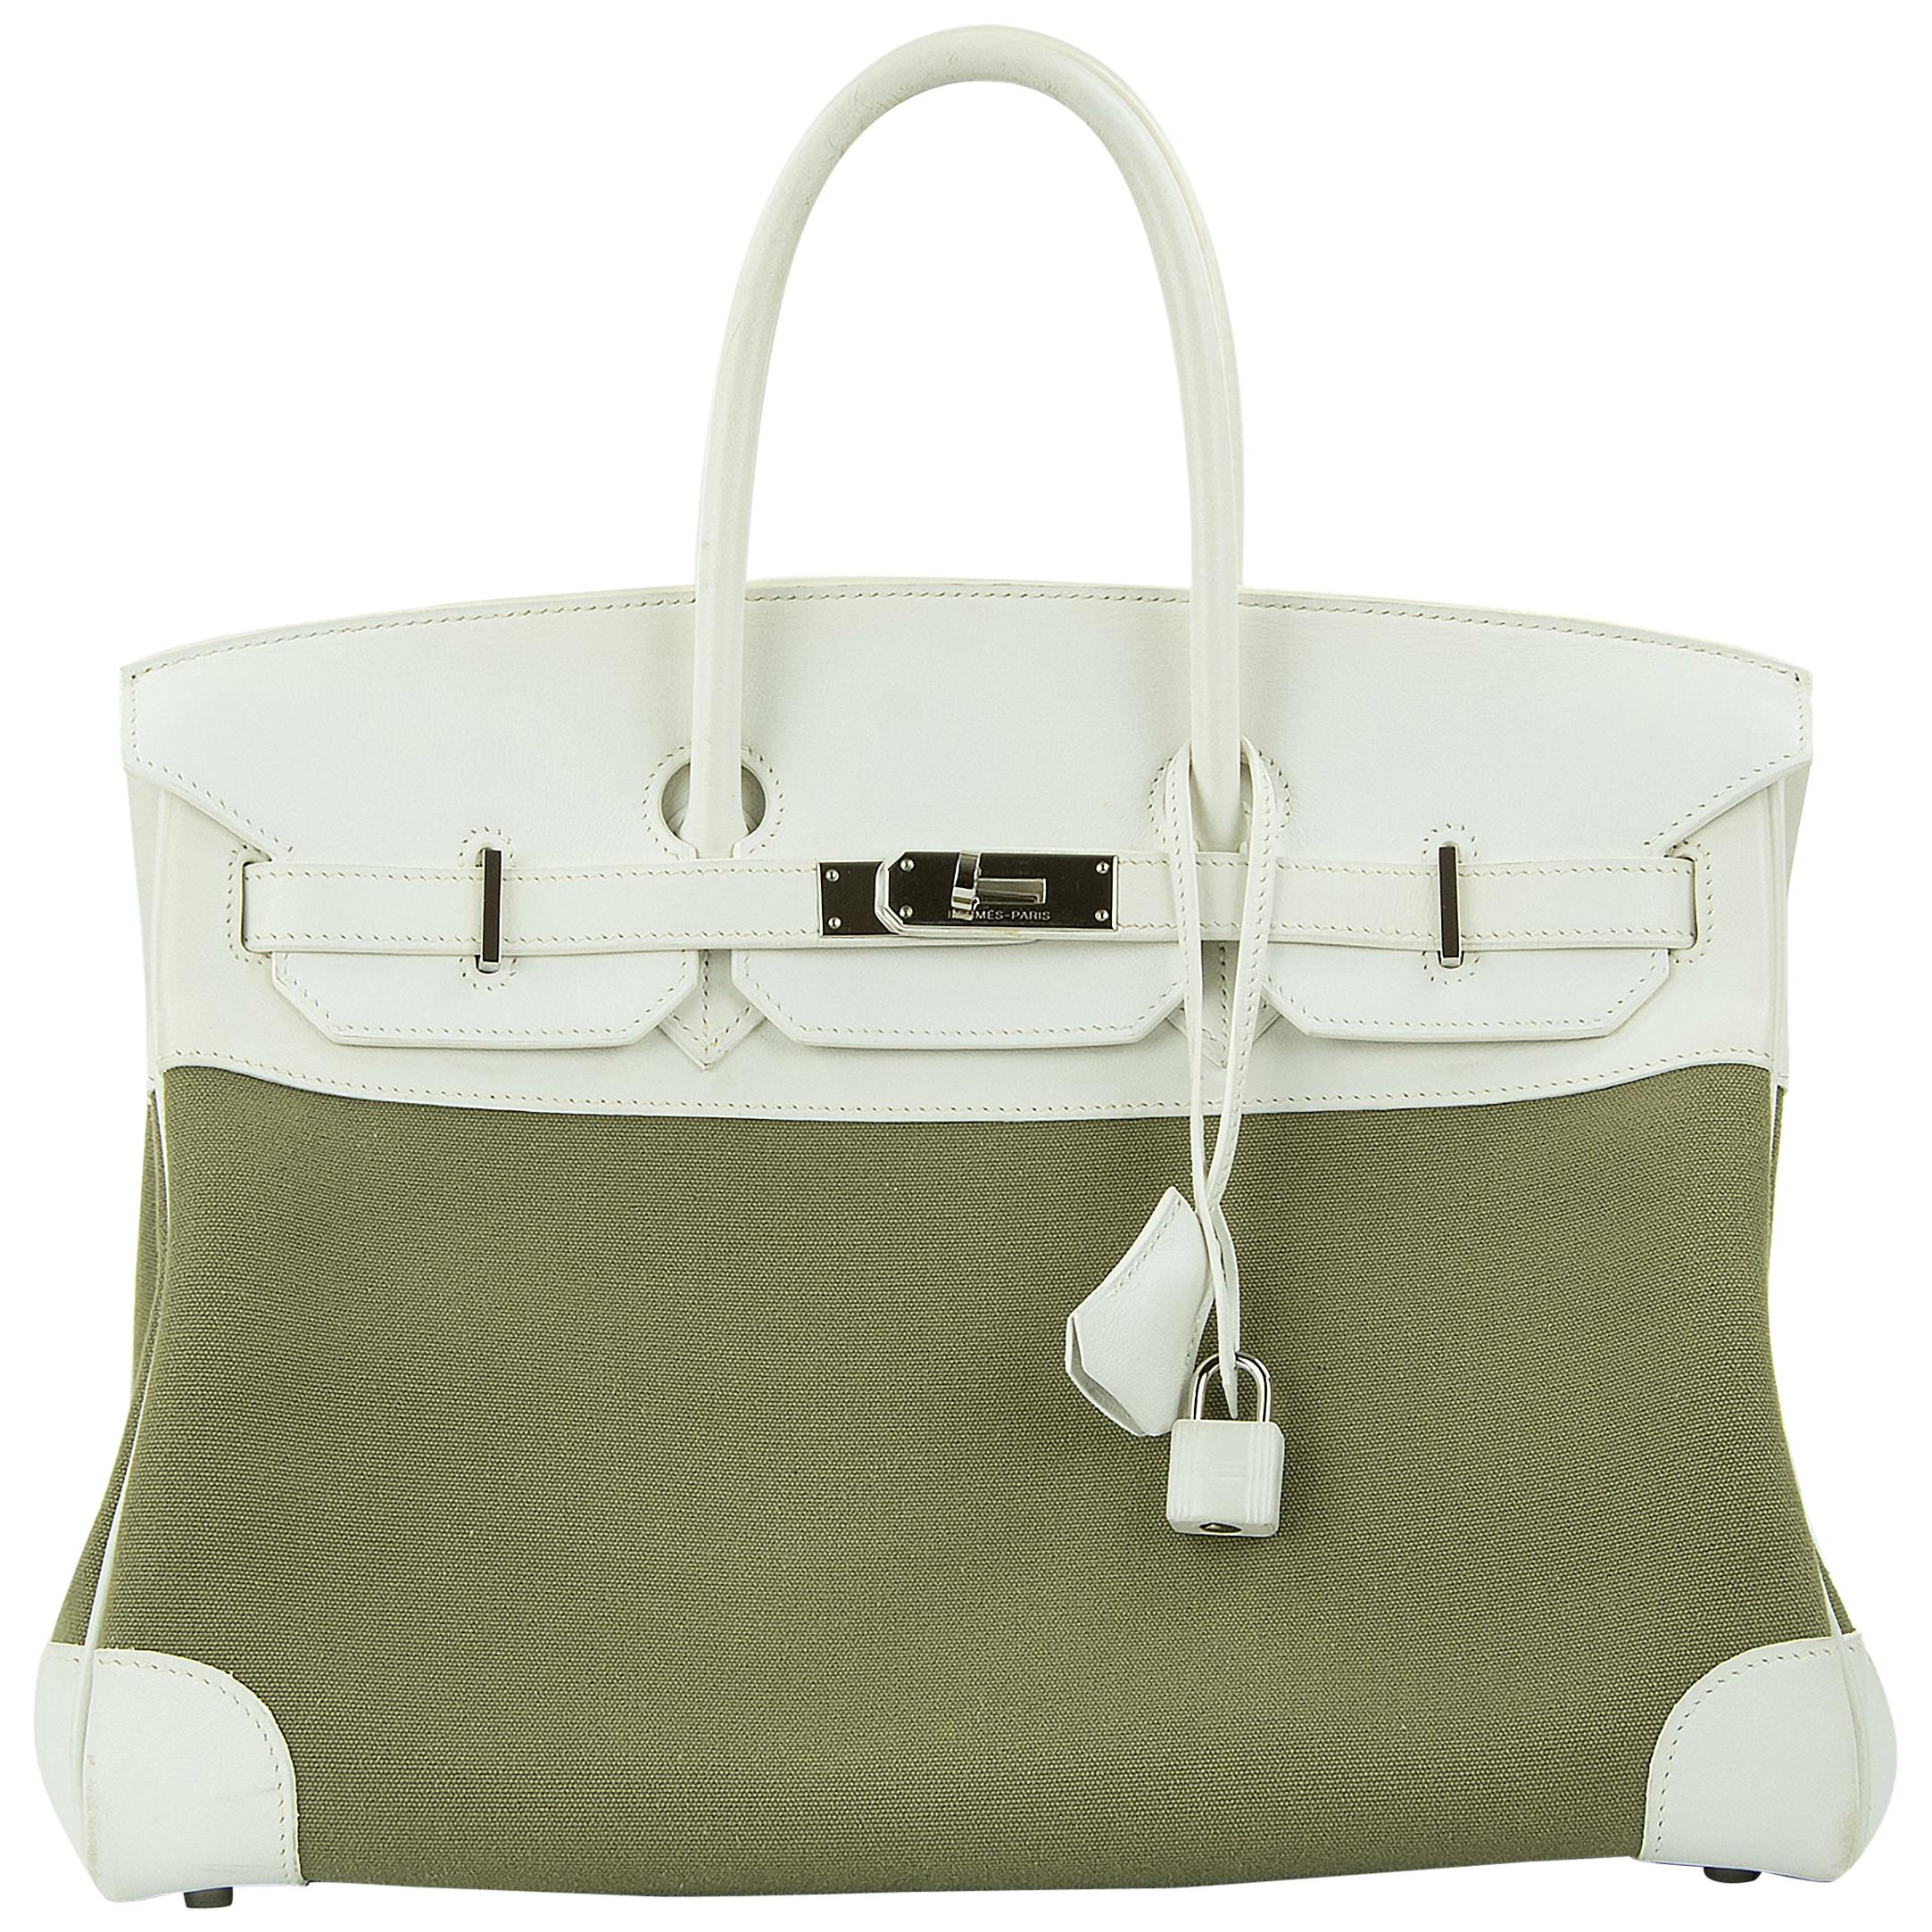 Hermes Birkin Bag 35cm Olive Toile Officier Canvas White Leather PHW (Pre Owned) For Sale